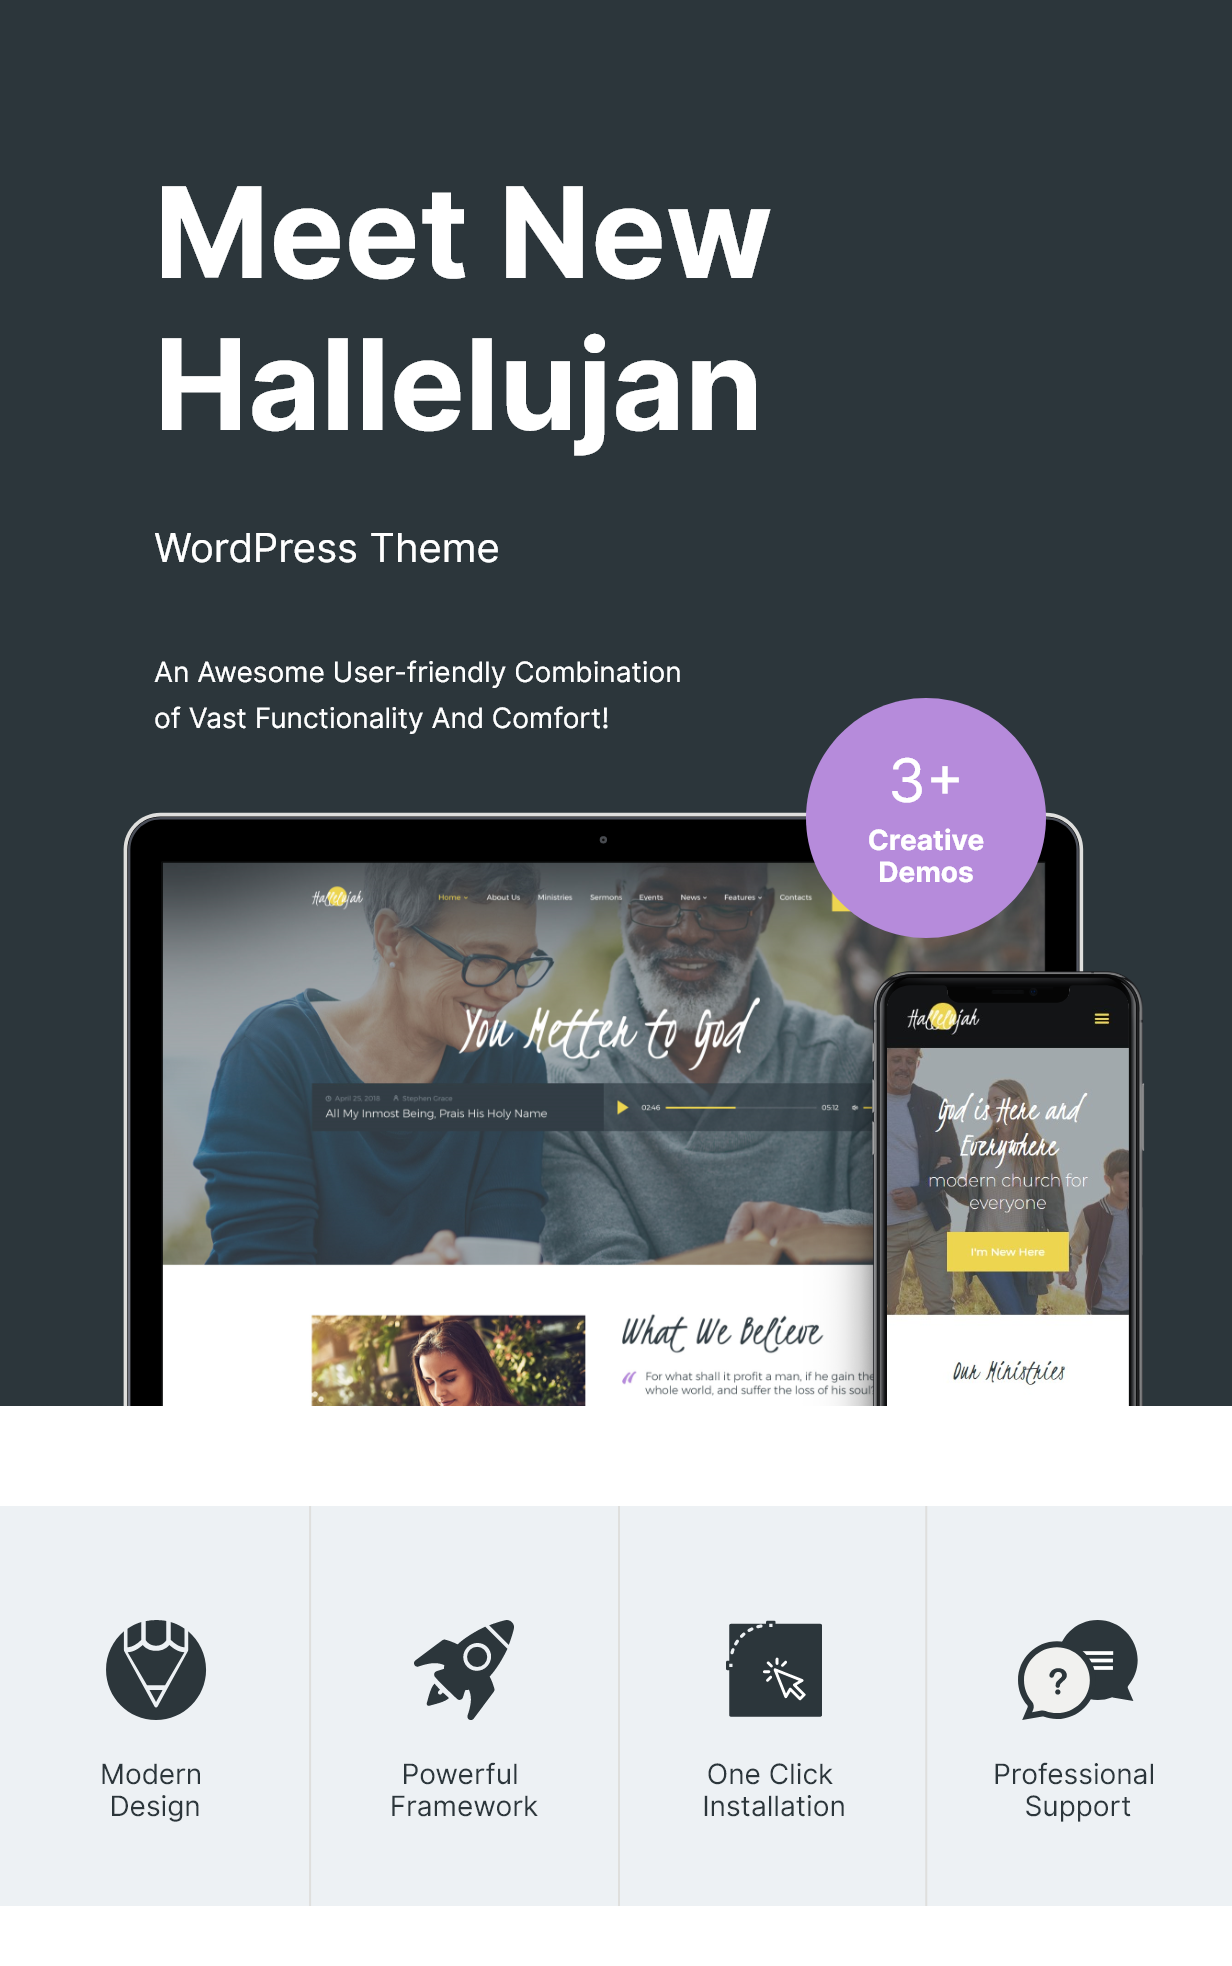 Mockups of Iphone and Macbook with templates and white lettering "Meet New Hallelujan".